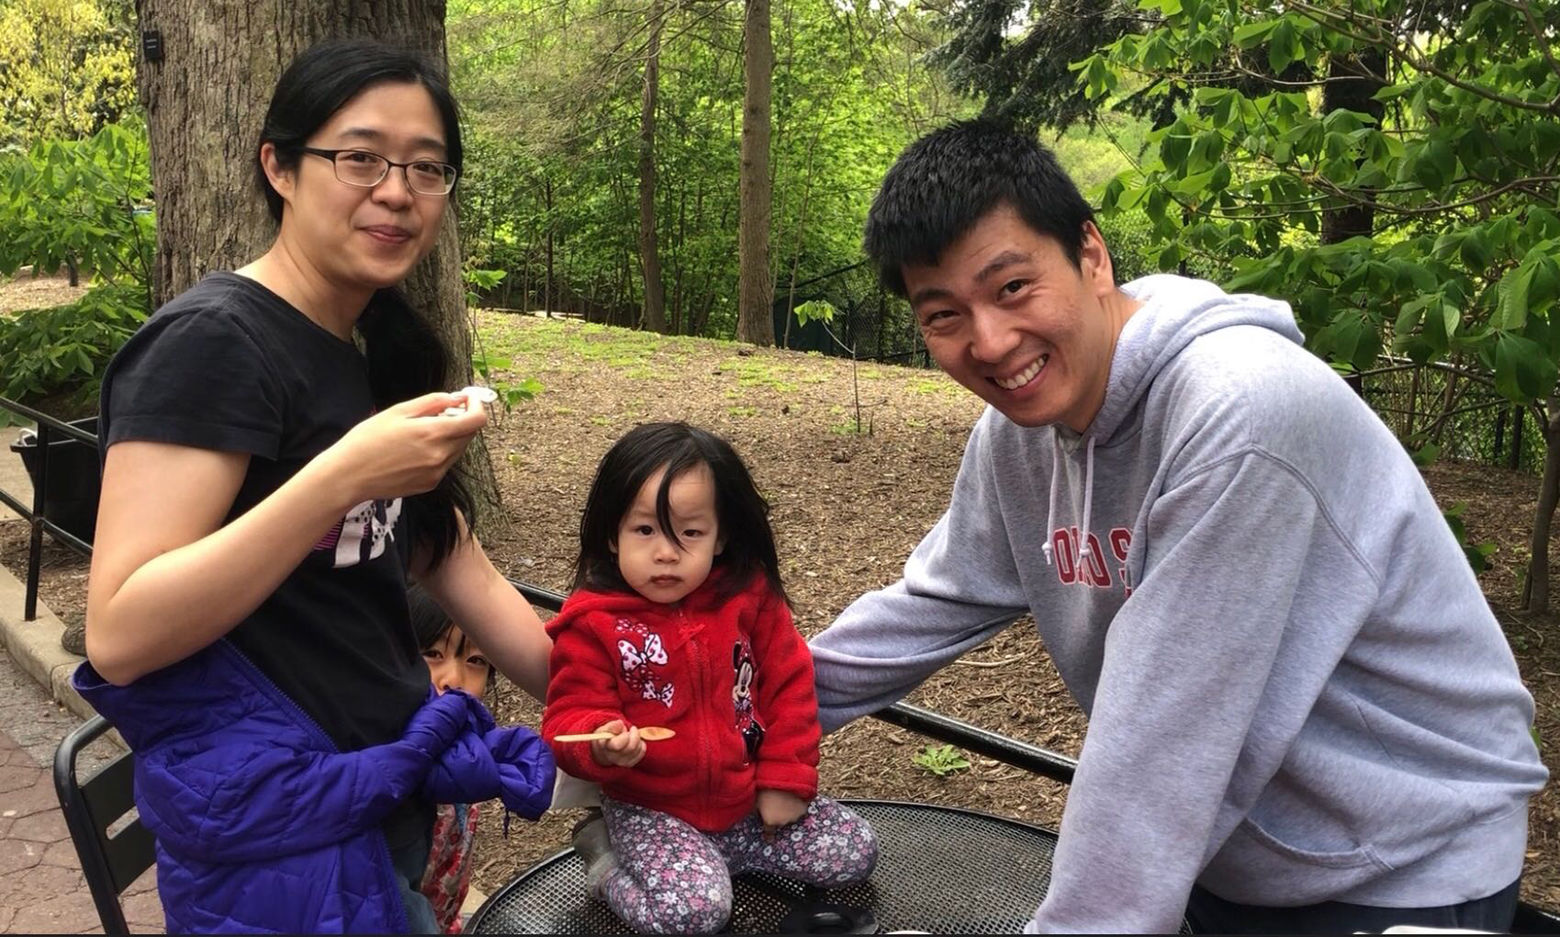 The Zhang family, from Ames, Iowa, visited the National Zoo on Monday. (WTOP/Kristi King)